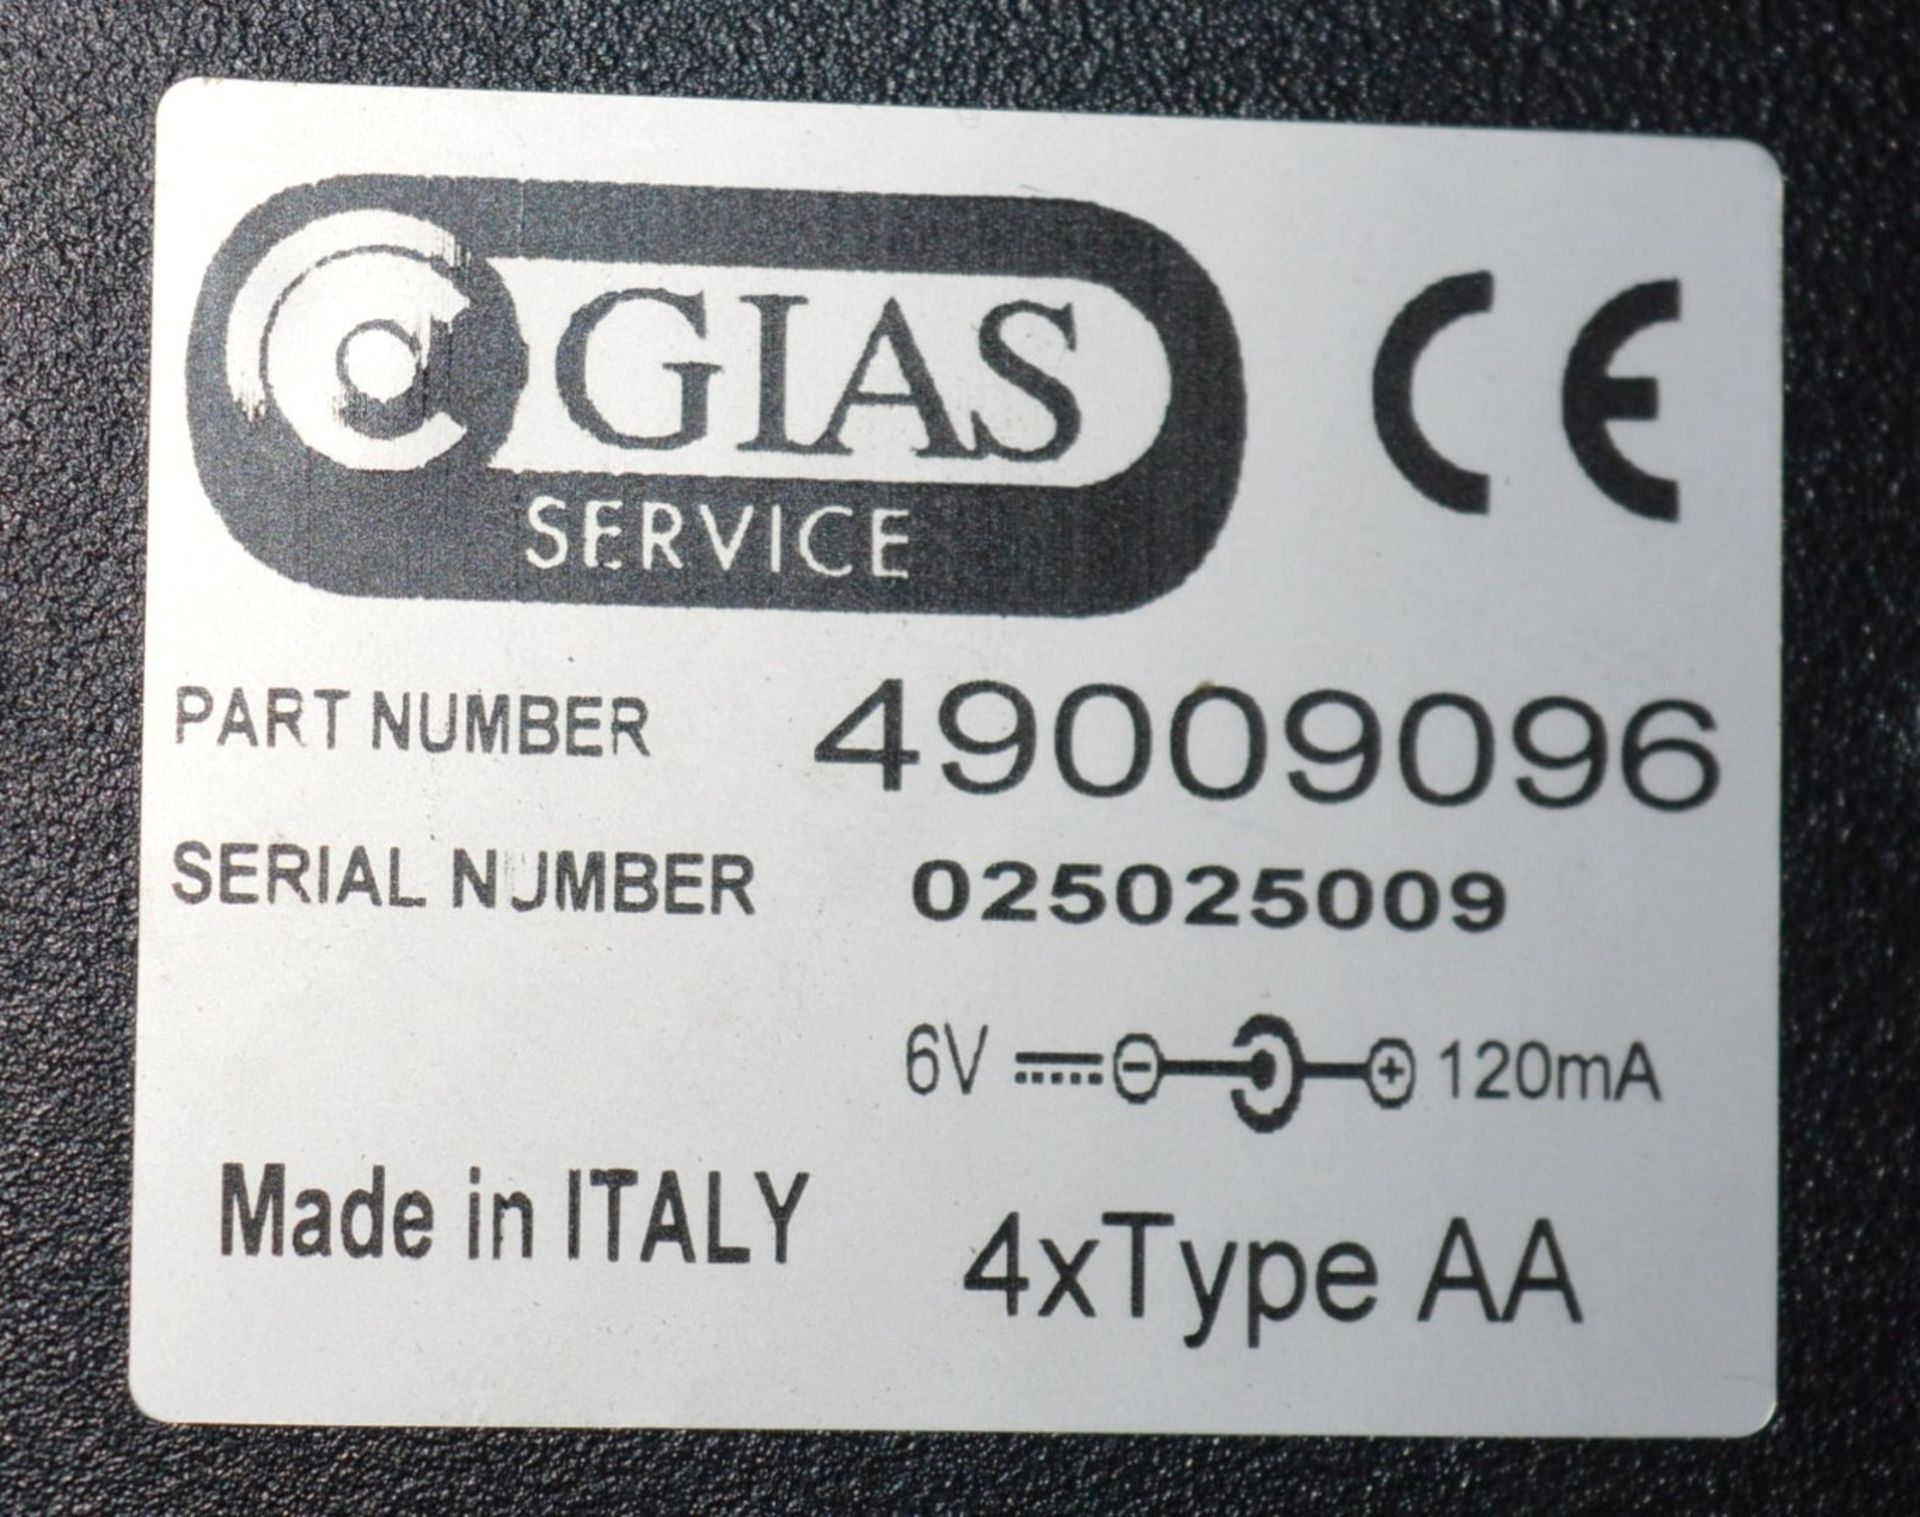 1 x Gias Candy Module EEPROM Manager - Model 49009096 - Boxed With Accessories - Working Order - - Image 2 of 3